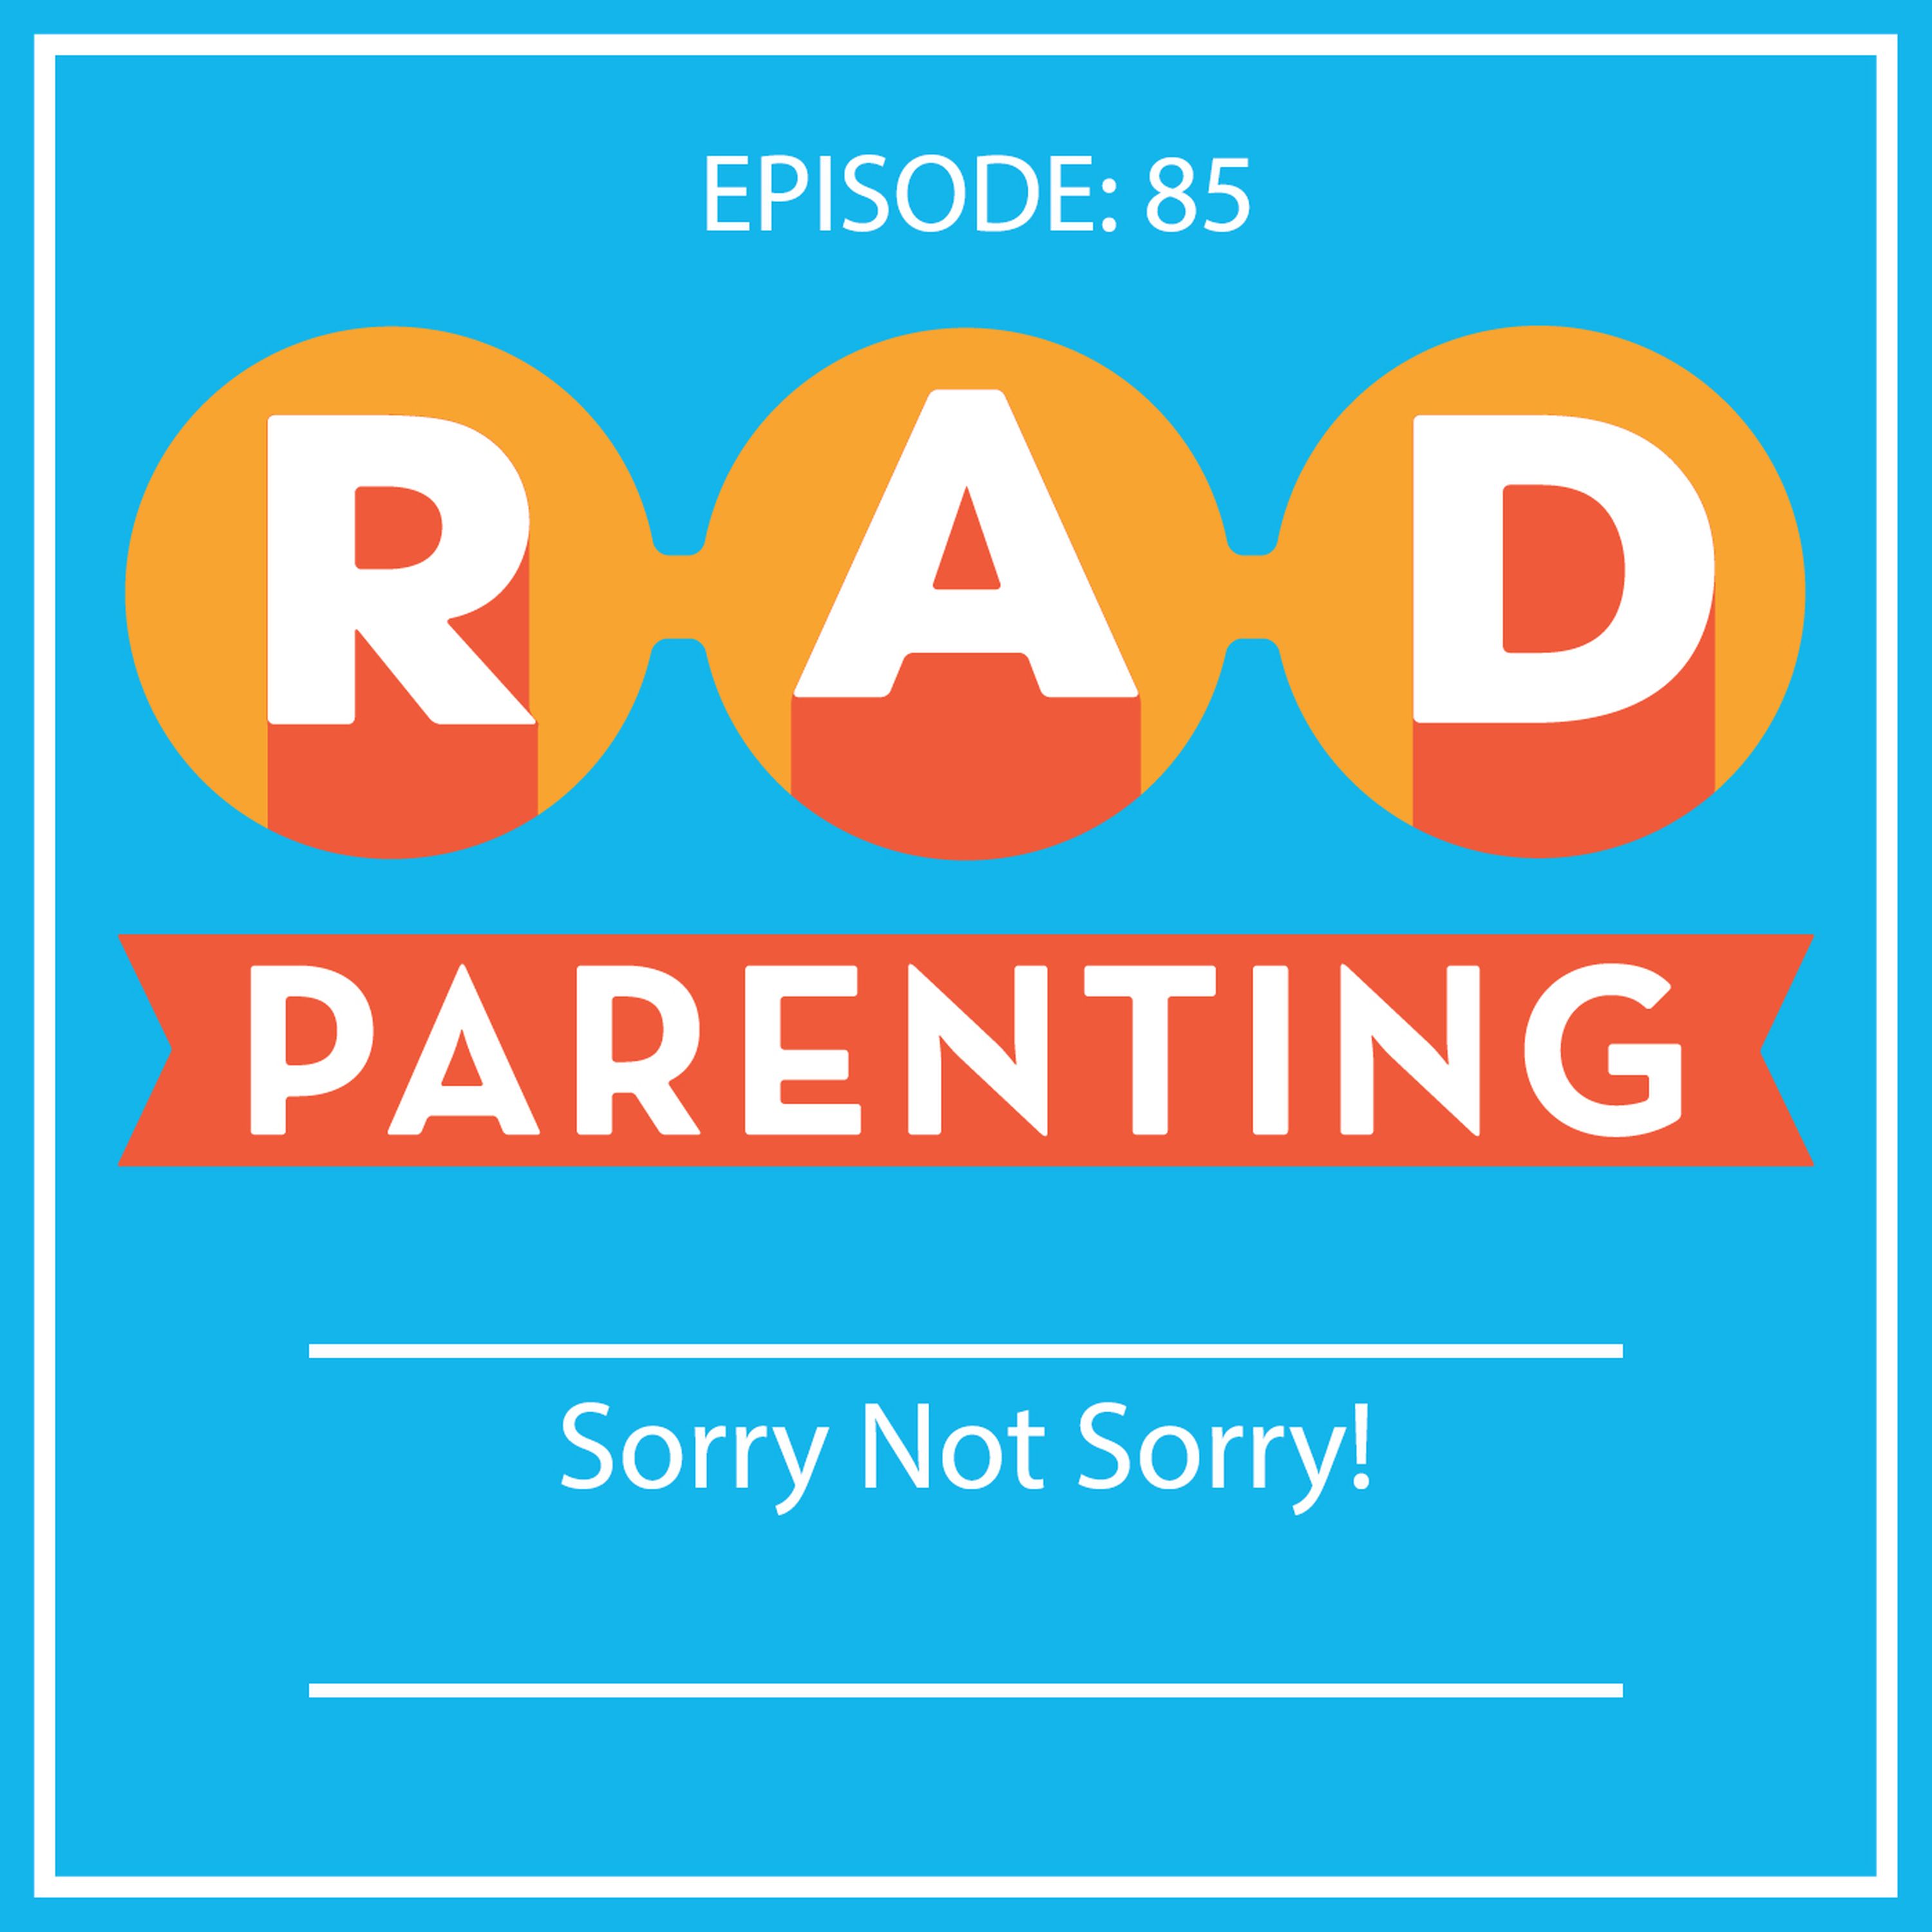 Episode 85: Sorry Not Sorry